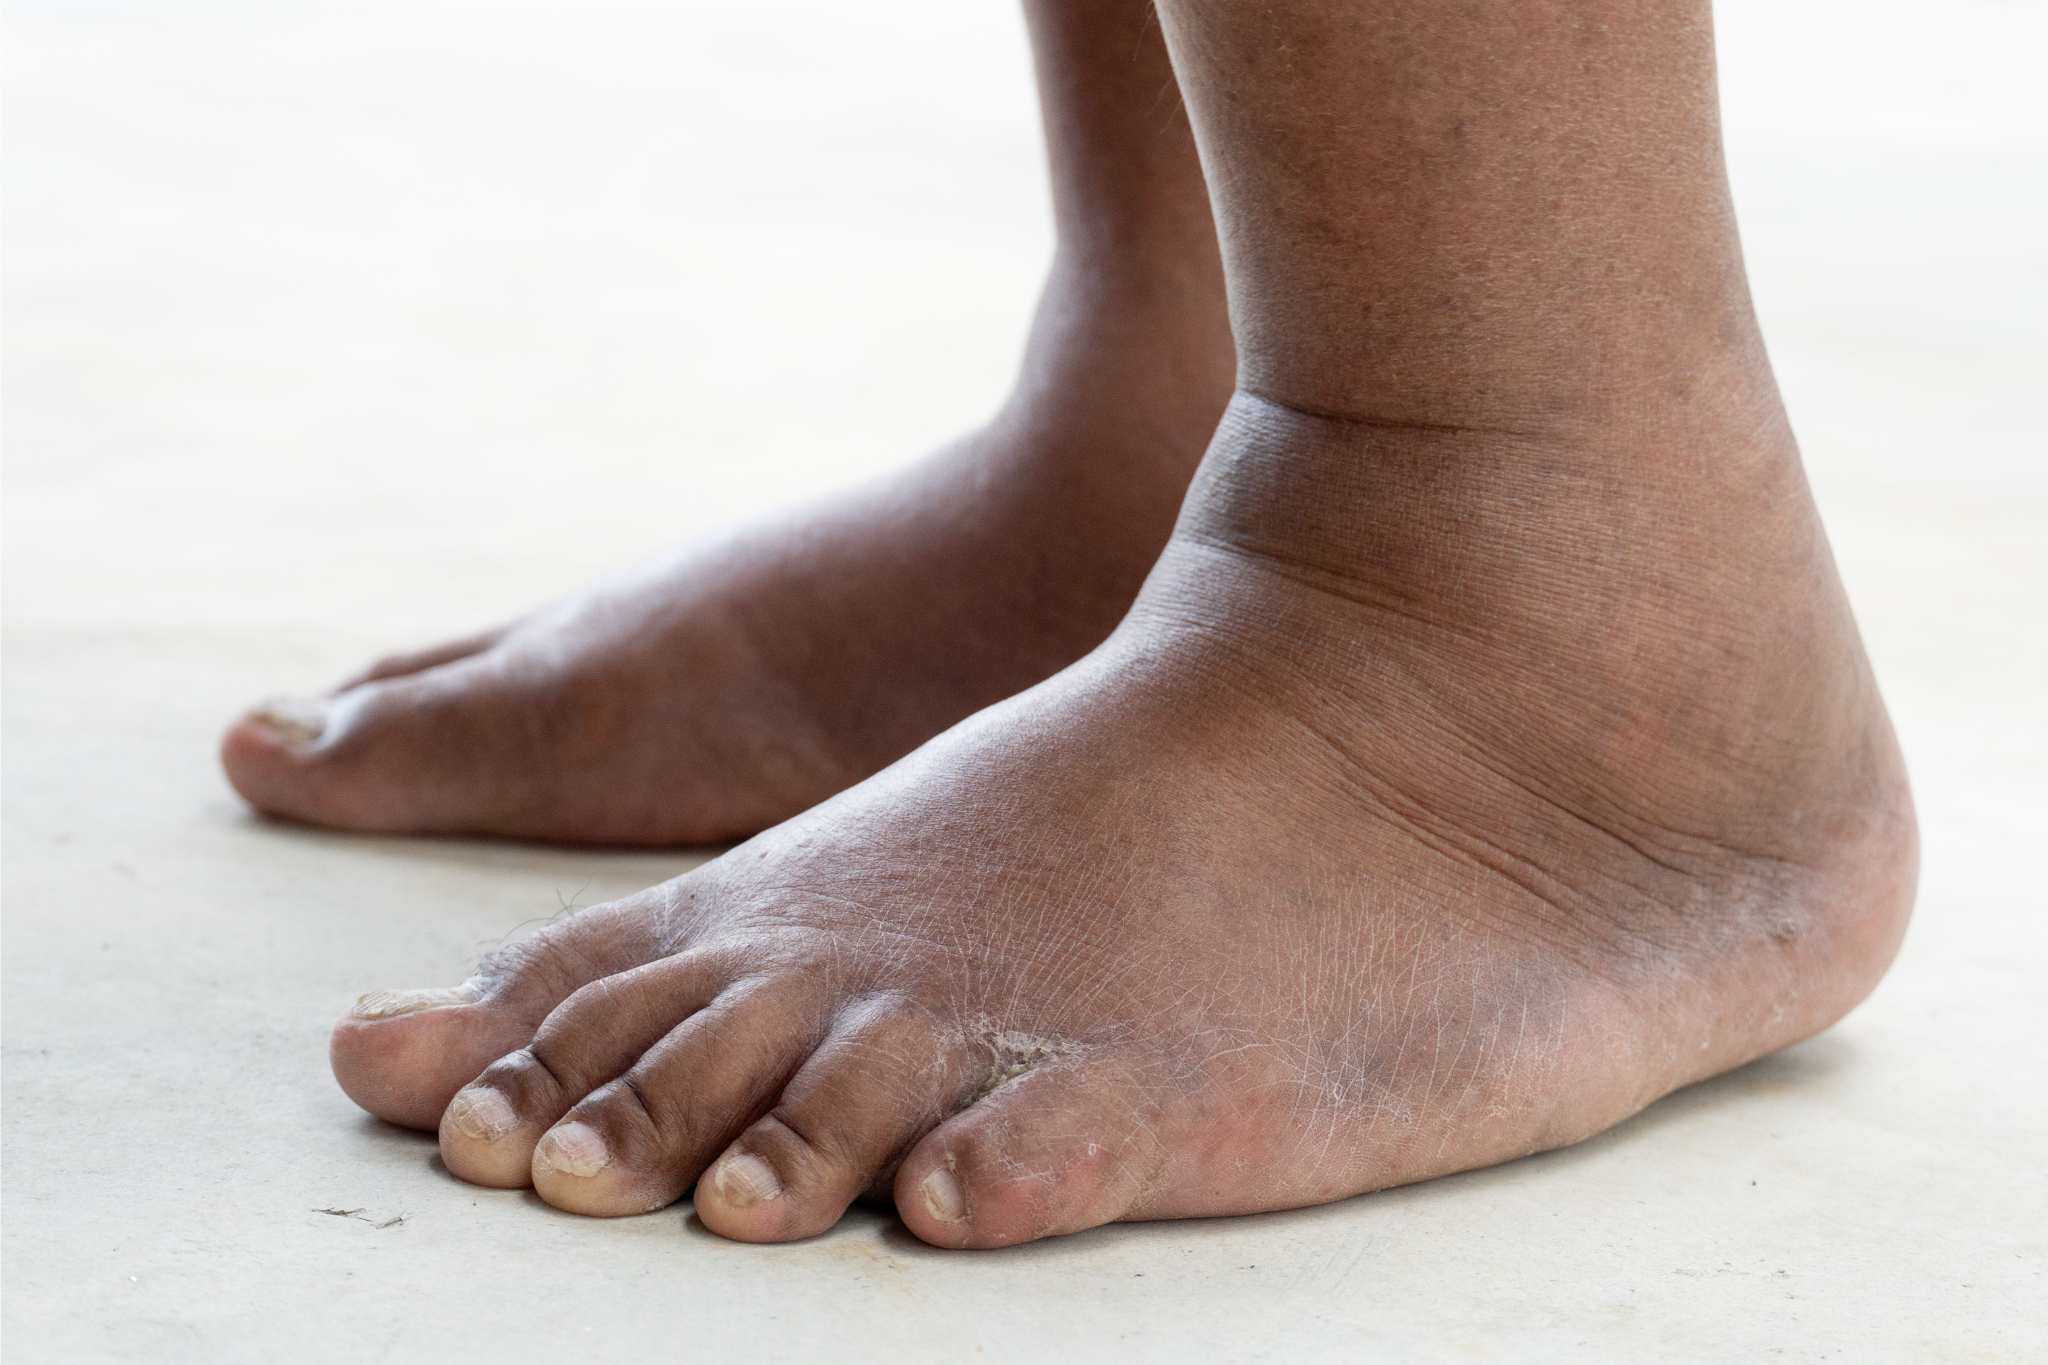 Side view of swollen feet on both sides. health problems of the elderly. Diabetes in the elderly and overweight. stand barefoot on the concrete floor.